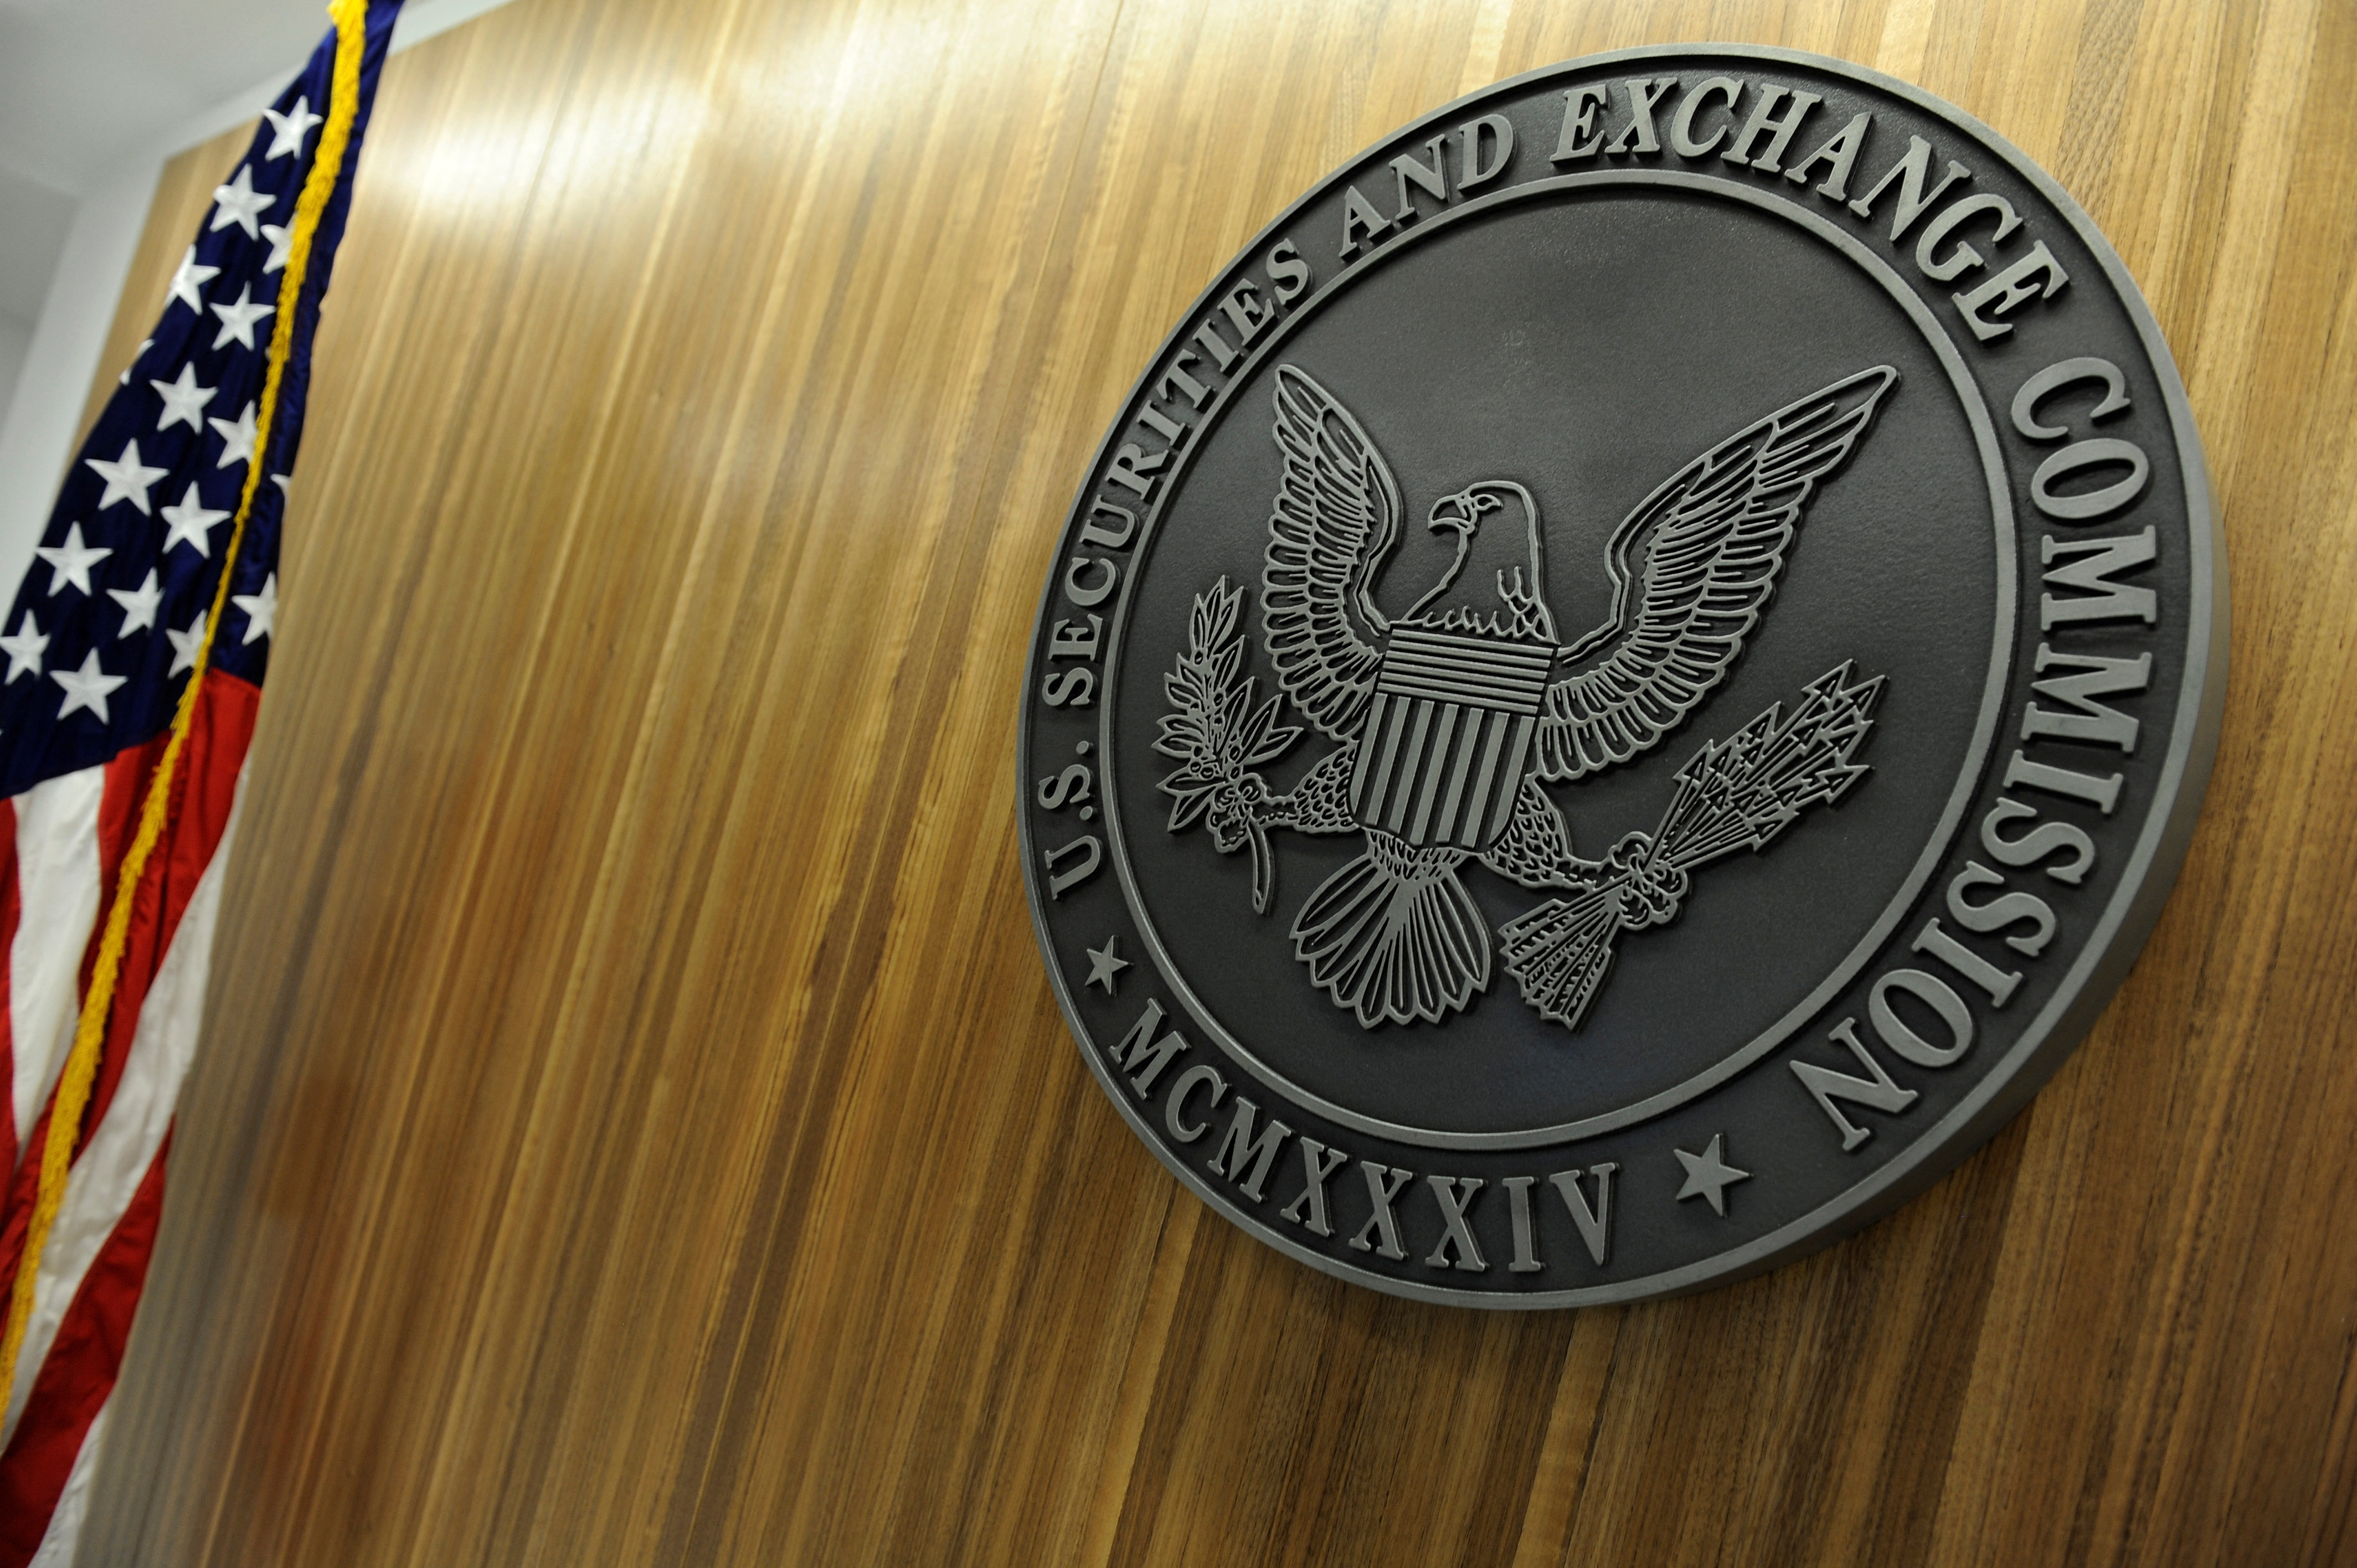 The seal of the U.S. Securities and Exchange Commission hangs on the wall at SEC headquarters